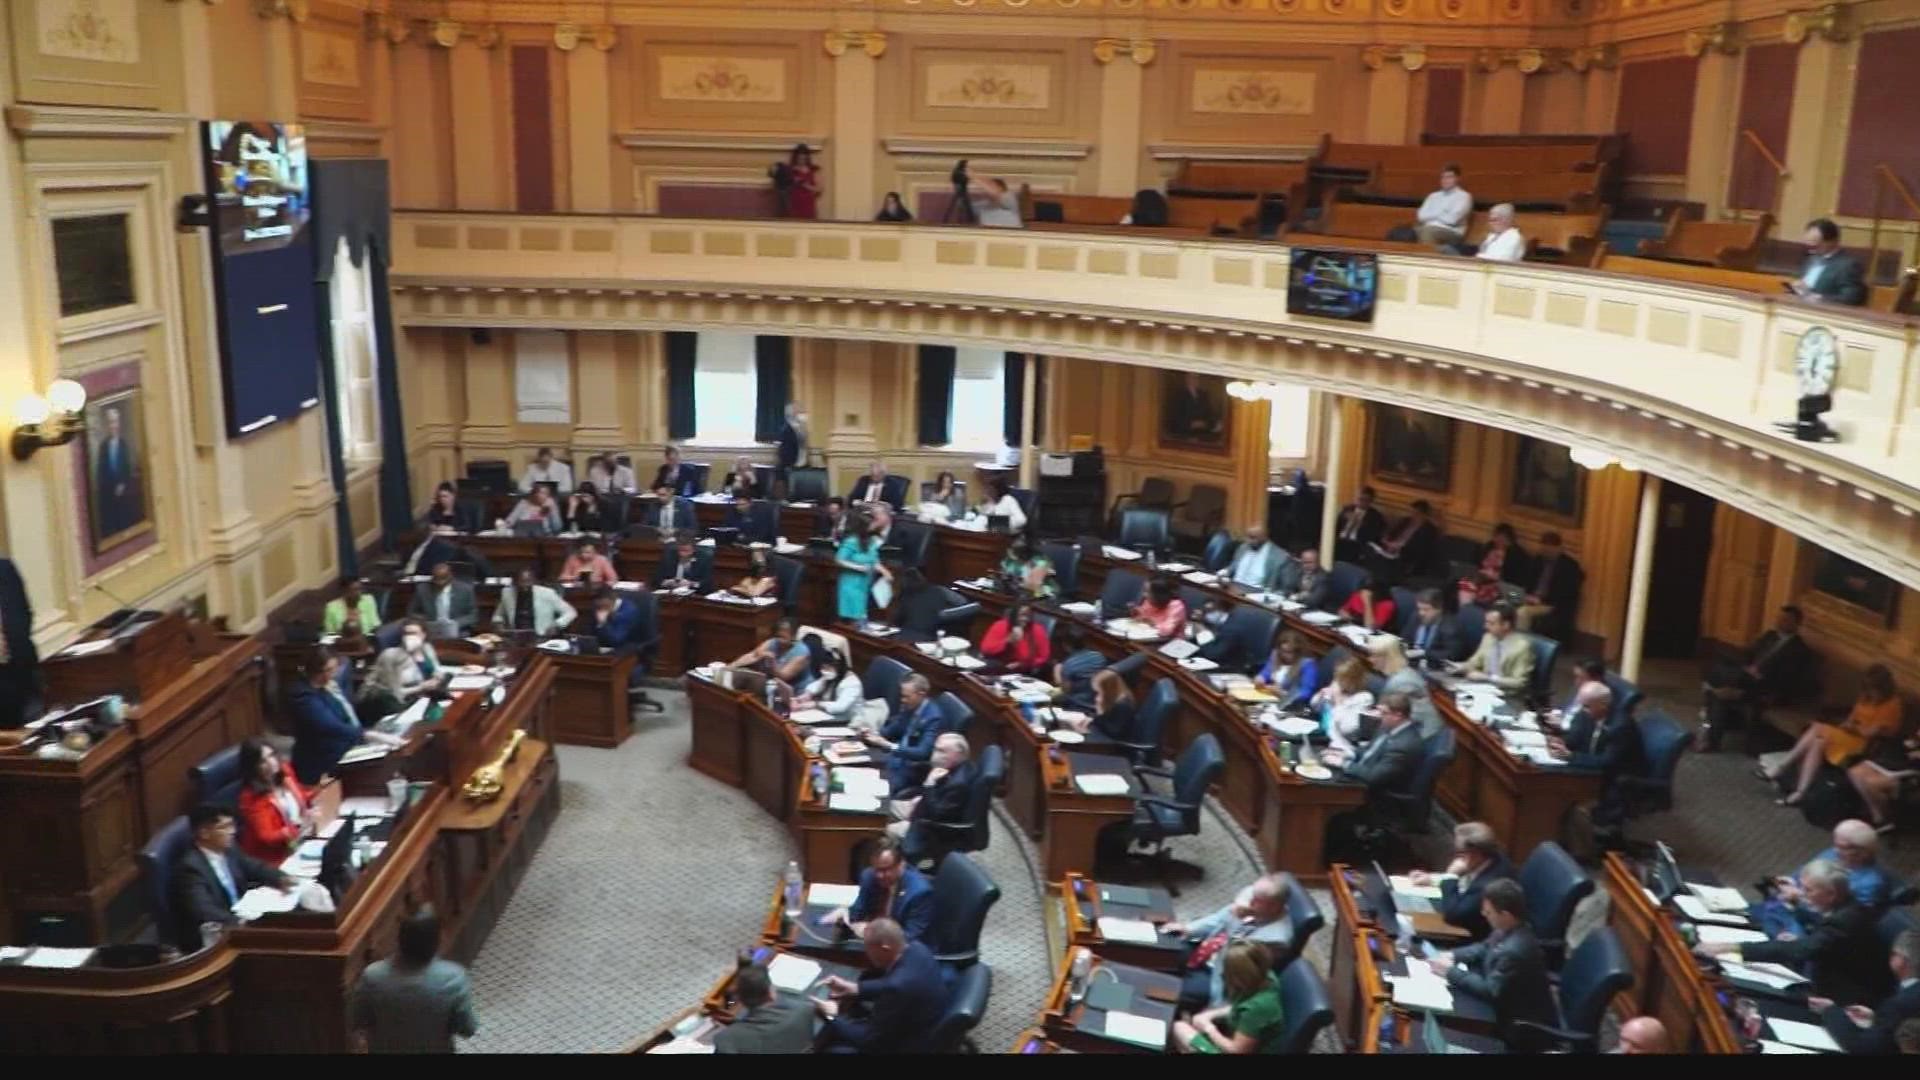 The Virginia Senate passed the budget deal 32-4. The House of Delegates' vote count was 88-7.